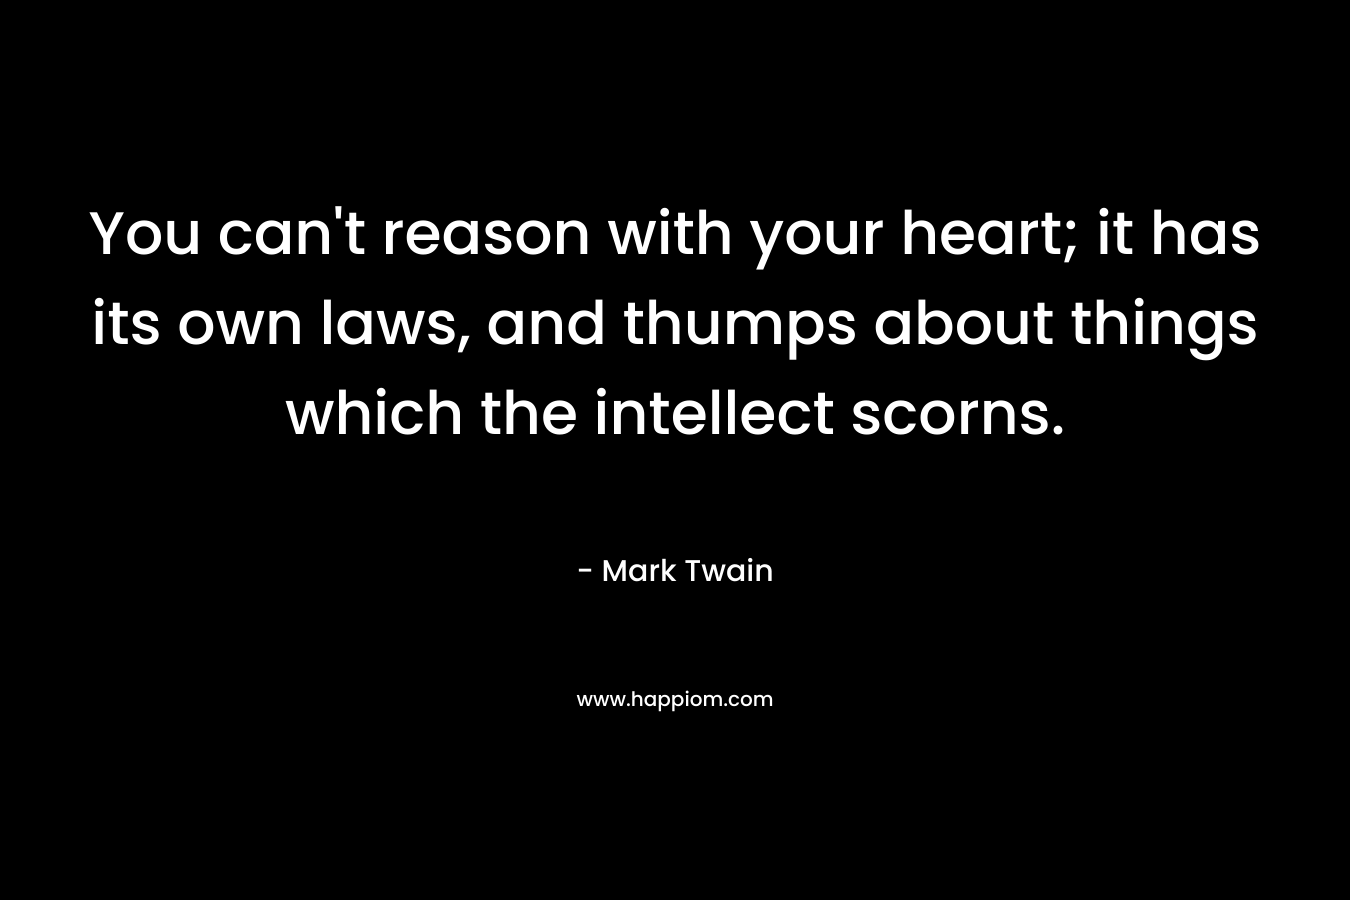 You can't reason with your heart; it has its own laws, and thumps about things which the intellect scorns.